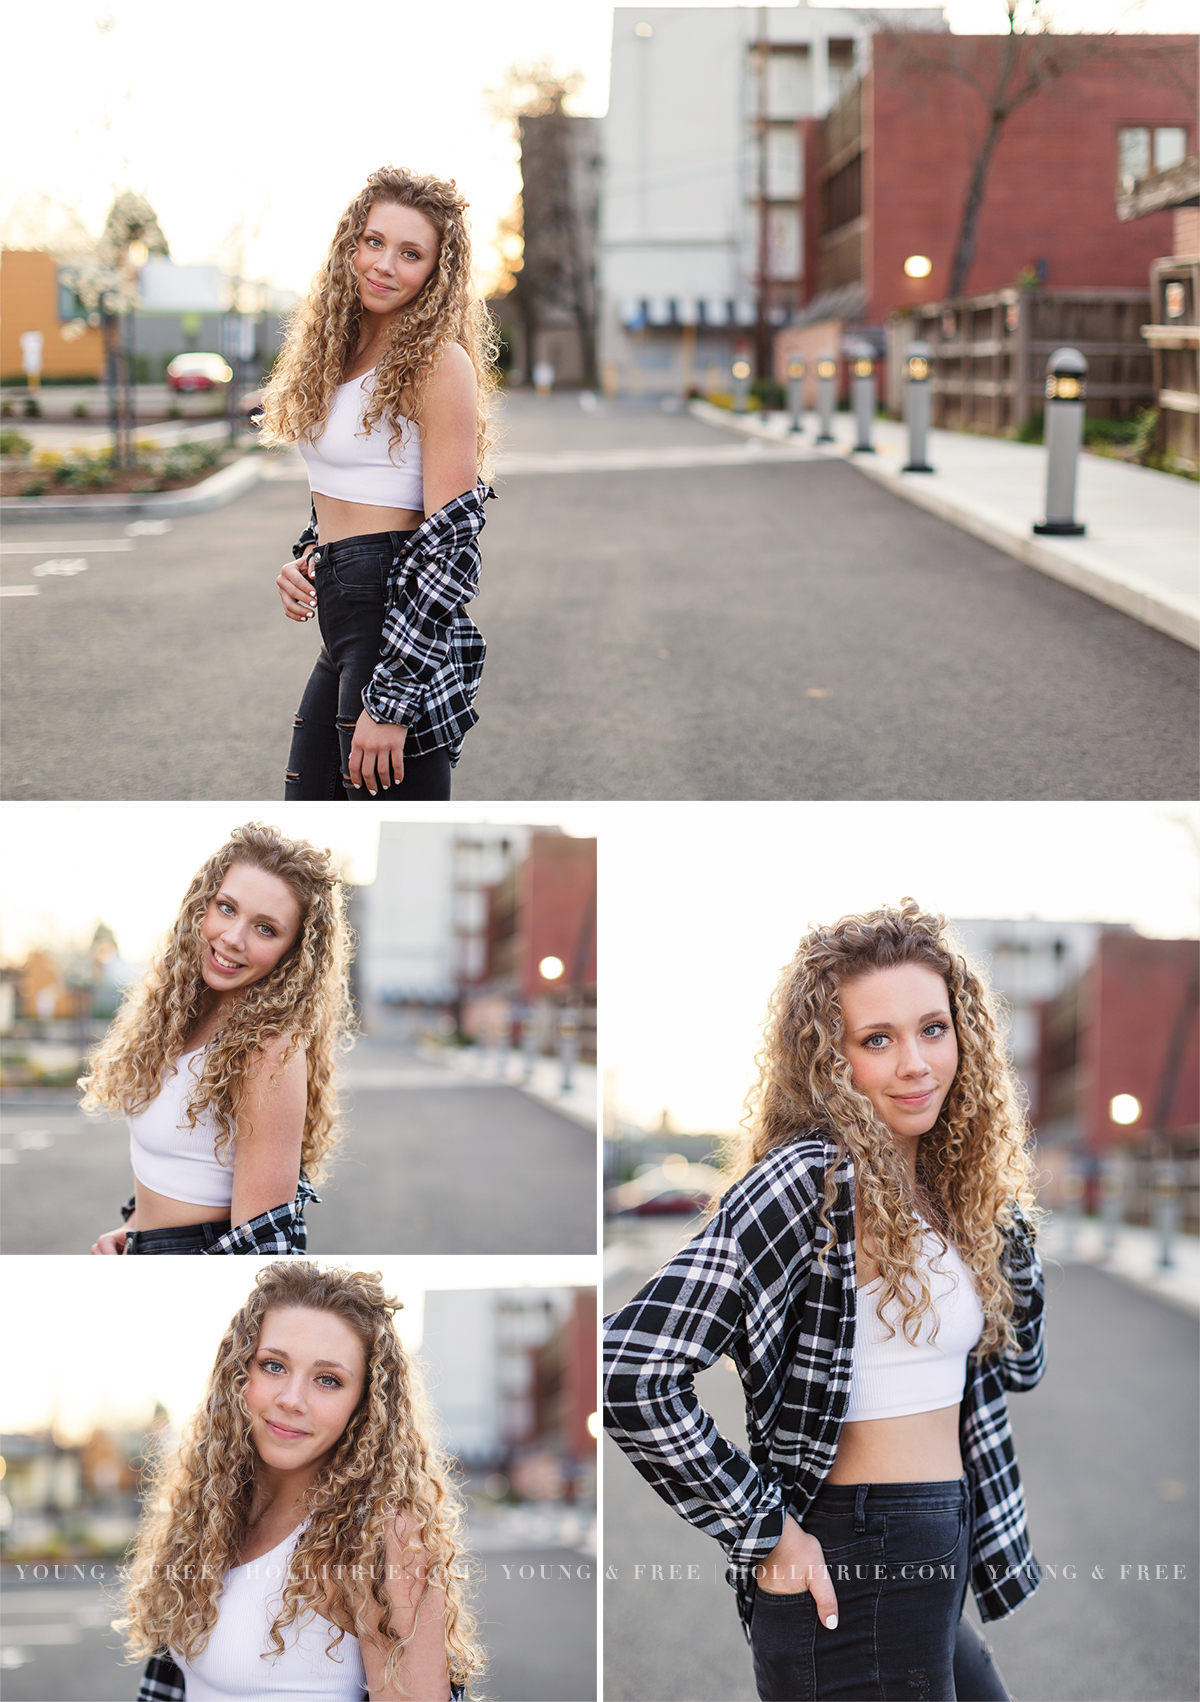 Sunset Senior Pictures Session in Downtown Eugene by Holli True Photography